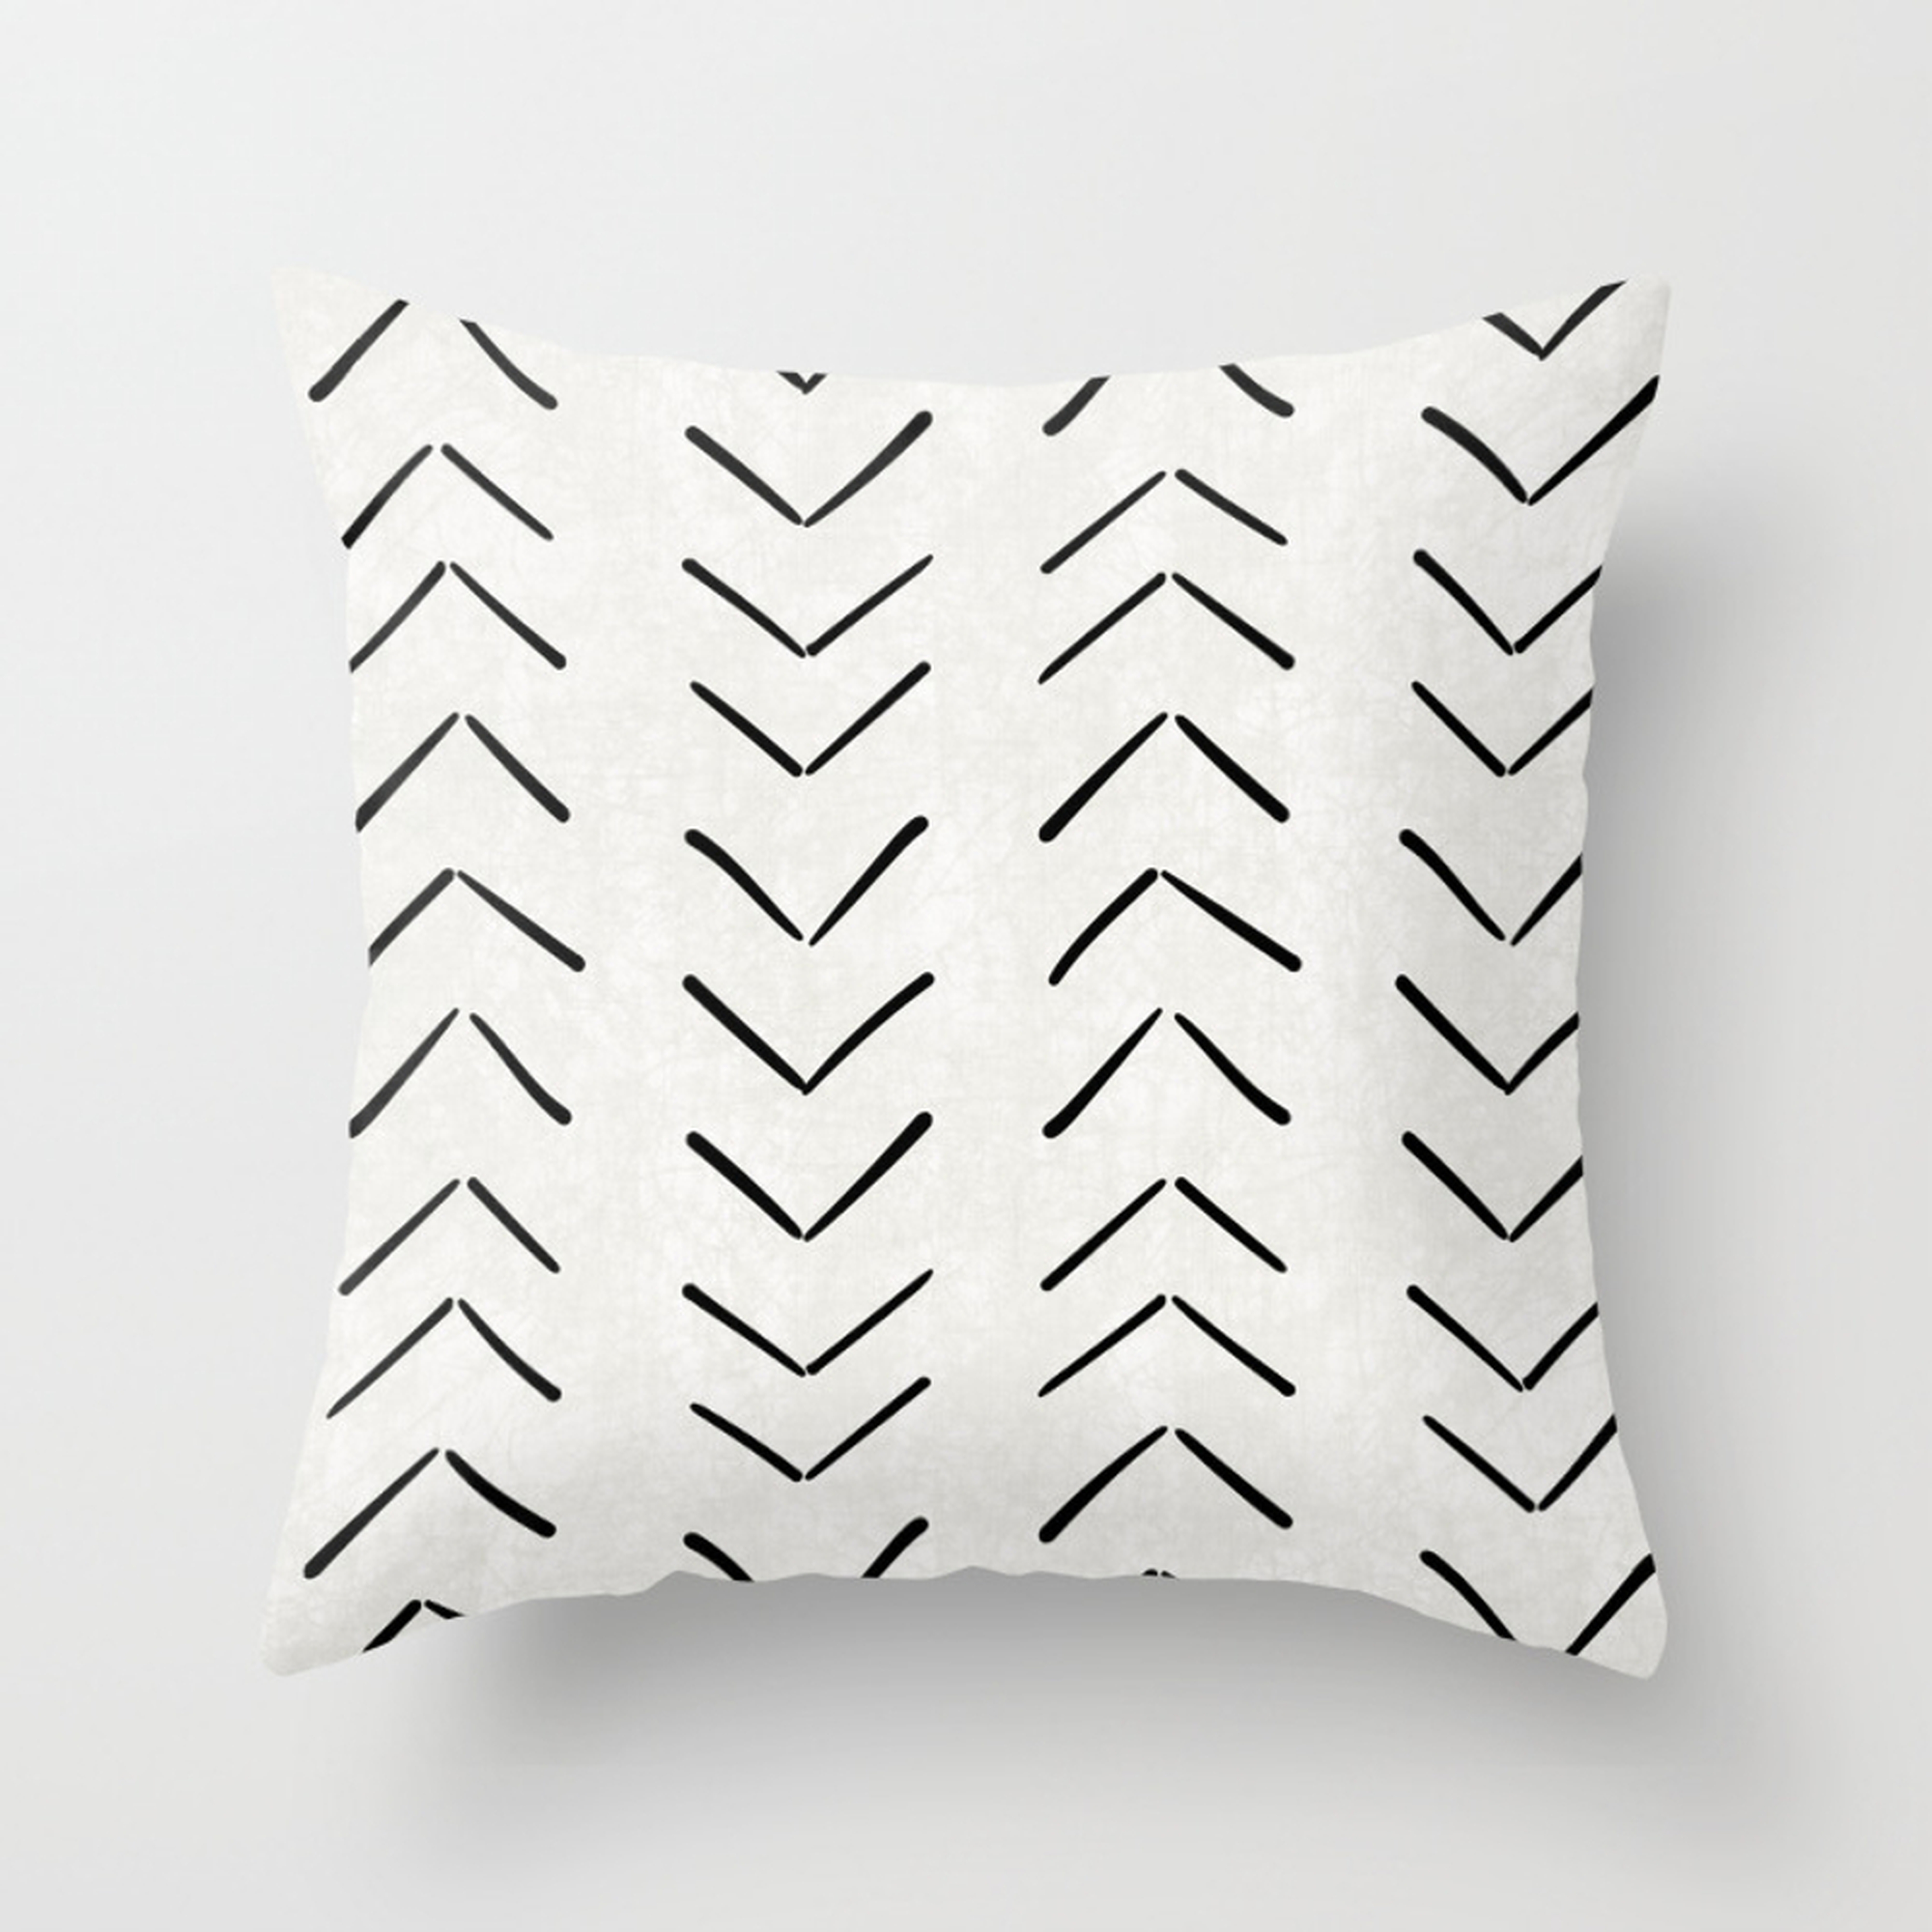 Boho Big Arrows In Cream Throw Pillow by House Of Haha - Cover (18" x 18") With Pillow Insert - Indoor Pillow - Society6